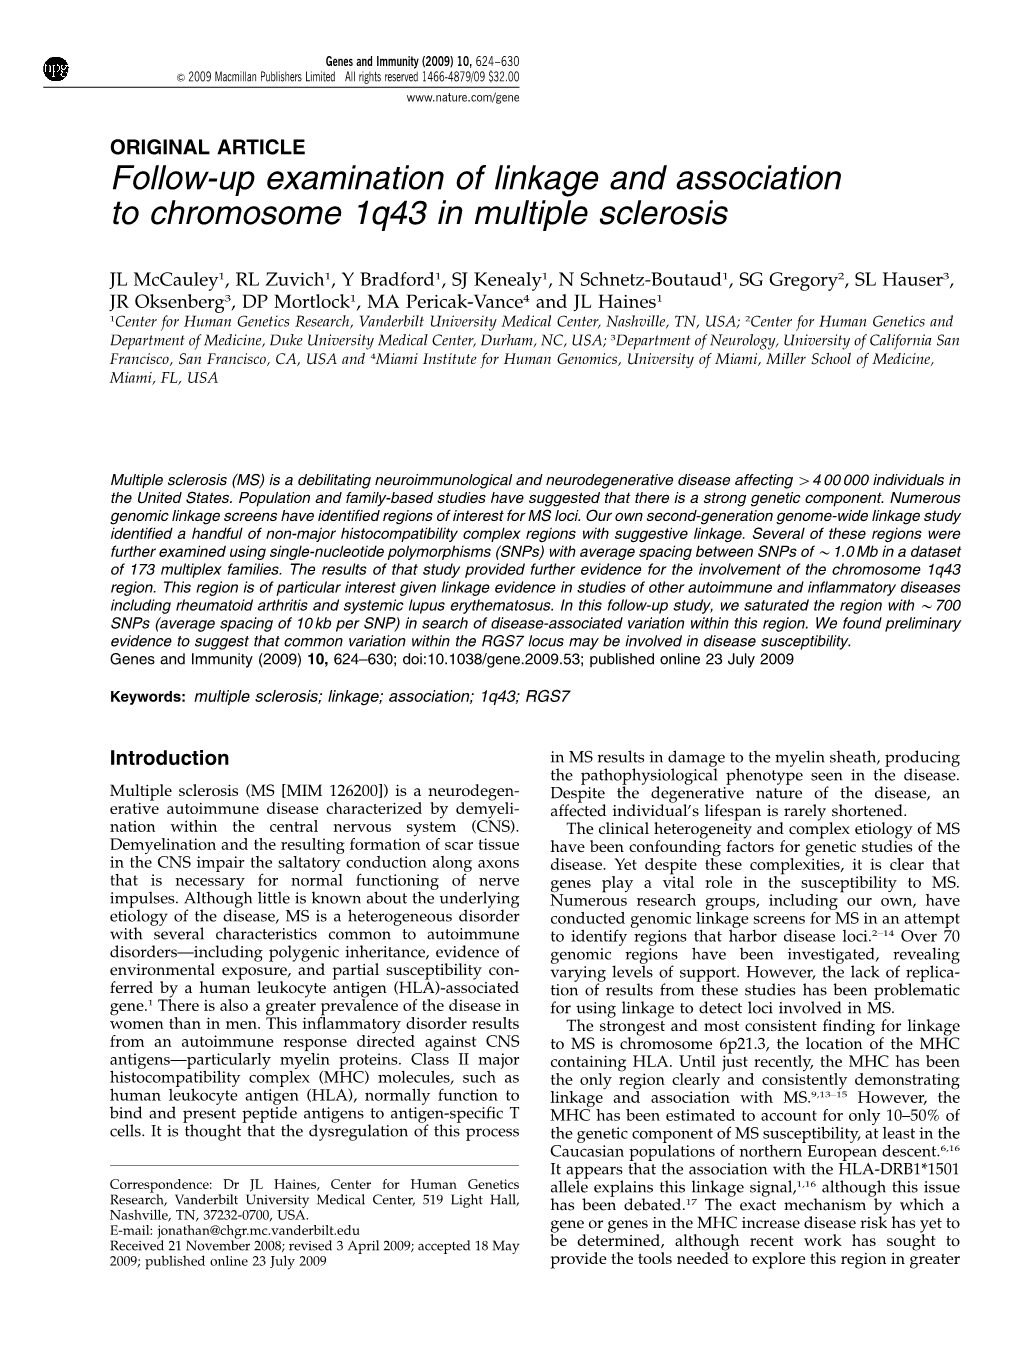 Follow-Up Examination of Linkage and Association to Chromosome 1Q43 in Multiple Sclerosis